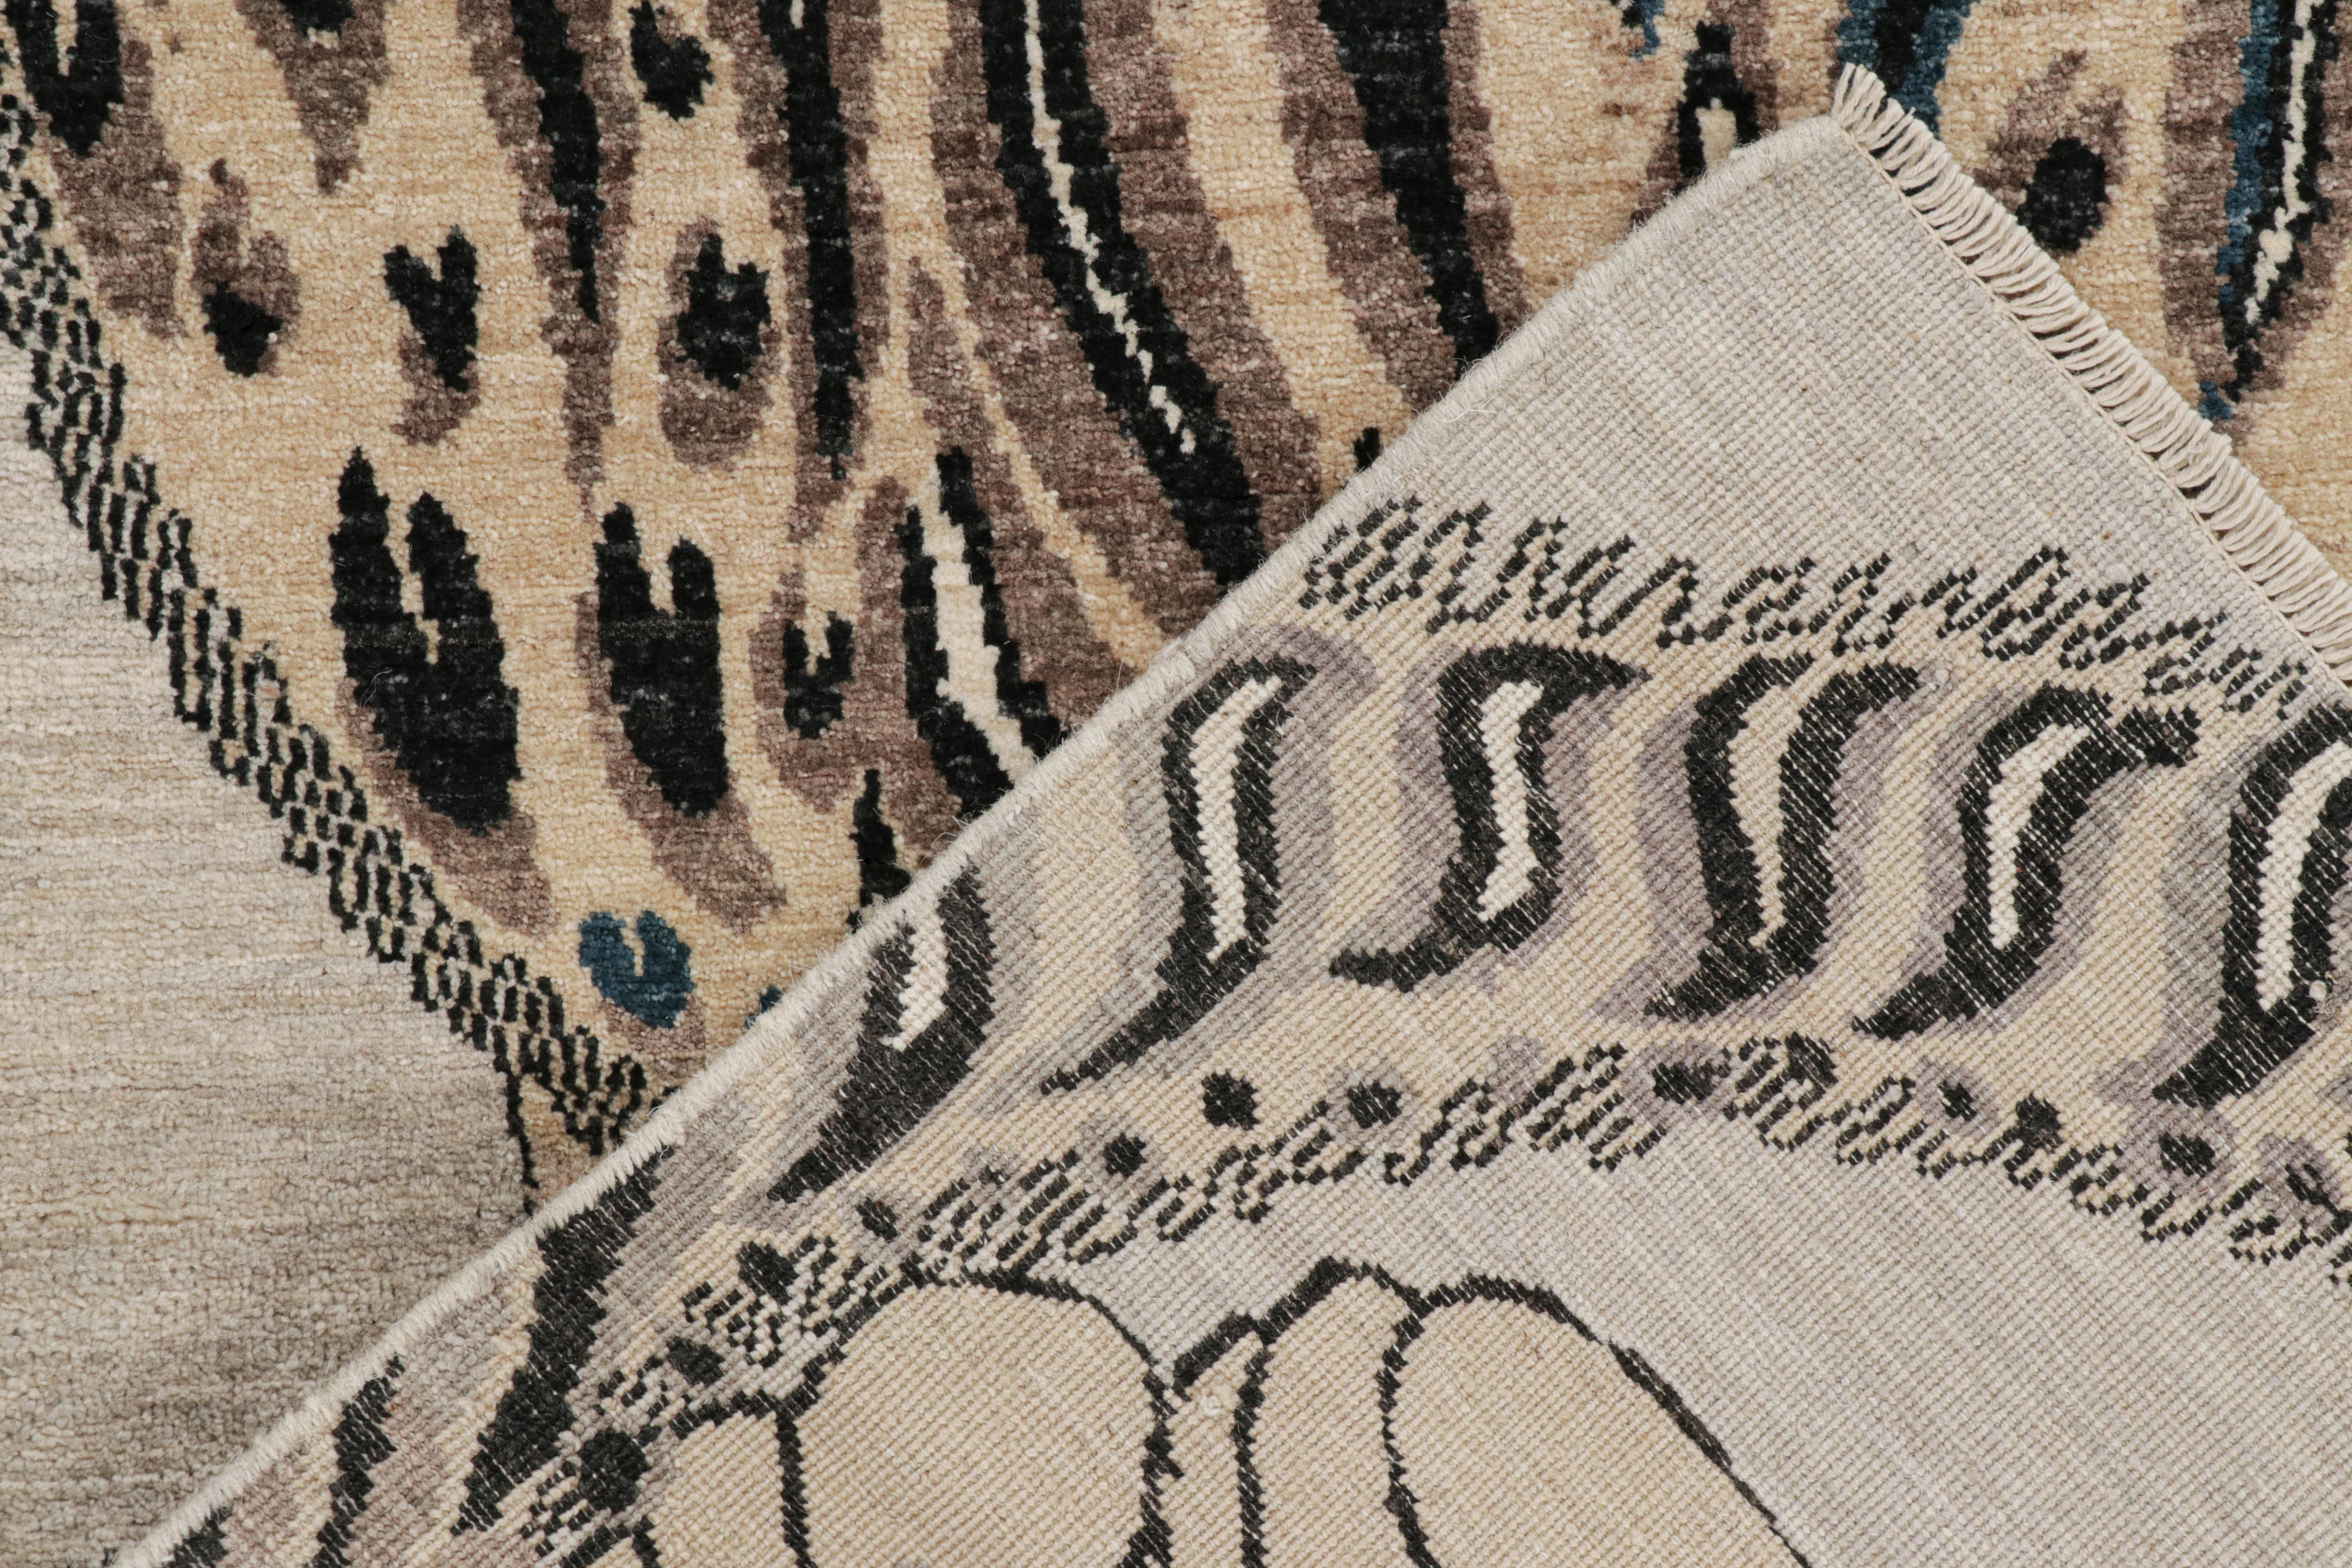 Contemporary Rug & Kilim’s Custom Tiger-Skin Rug with Beige/Brown, Blue, Black Pictorial For Sale